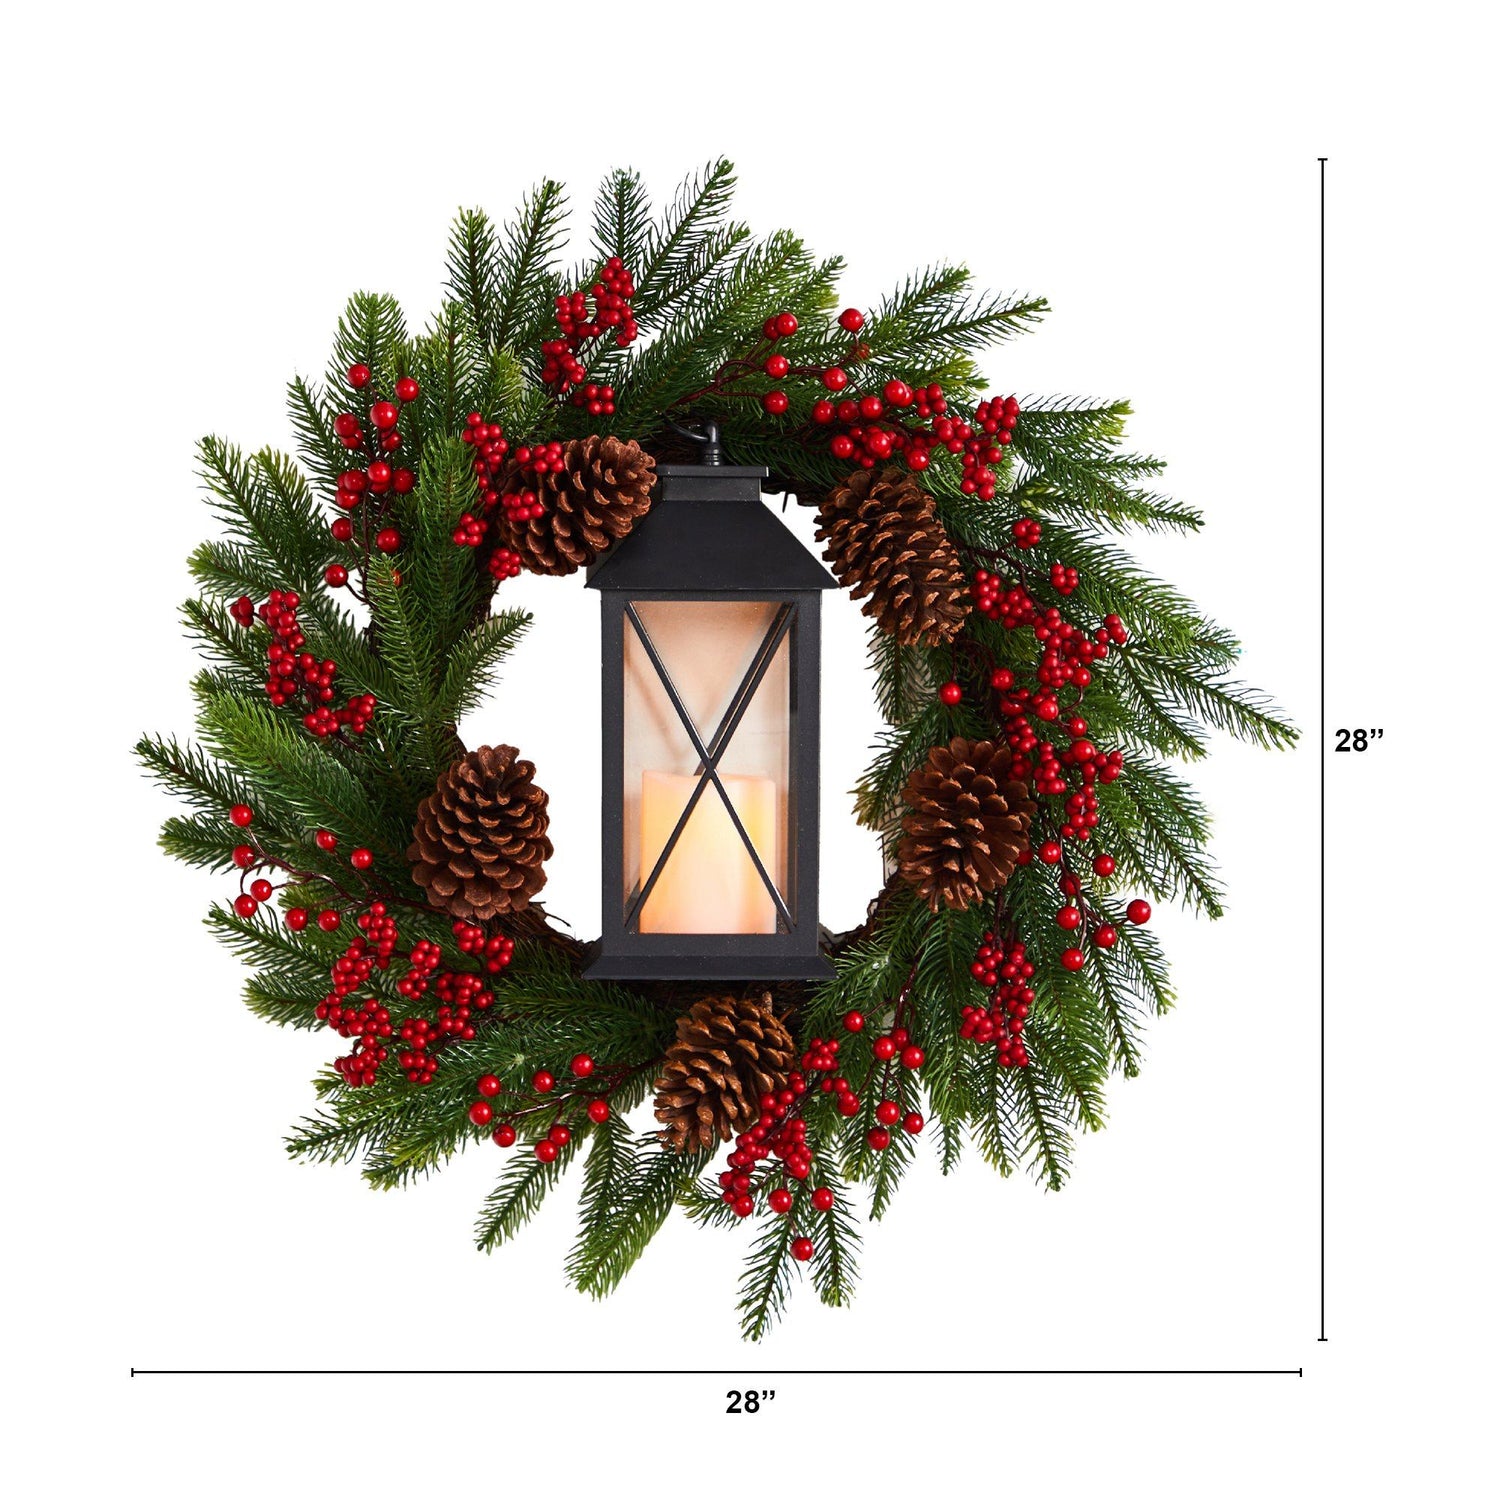 28” Berries and Pine Artificial Christmas Wreath with Lantern and Included LED Candle